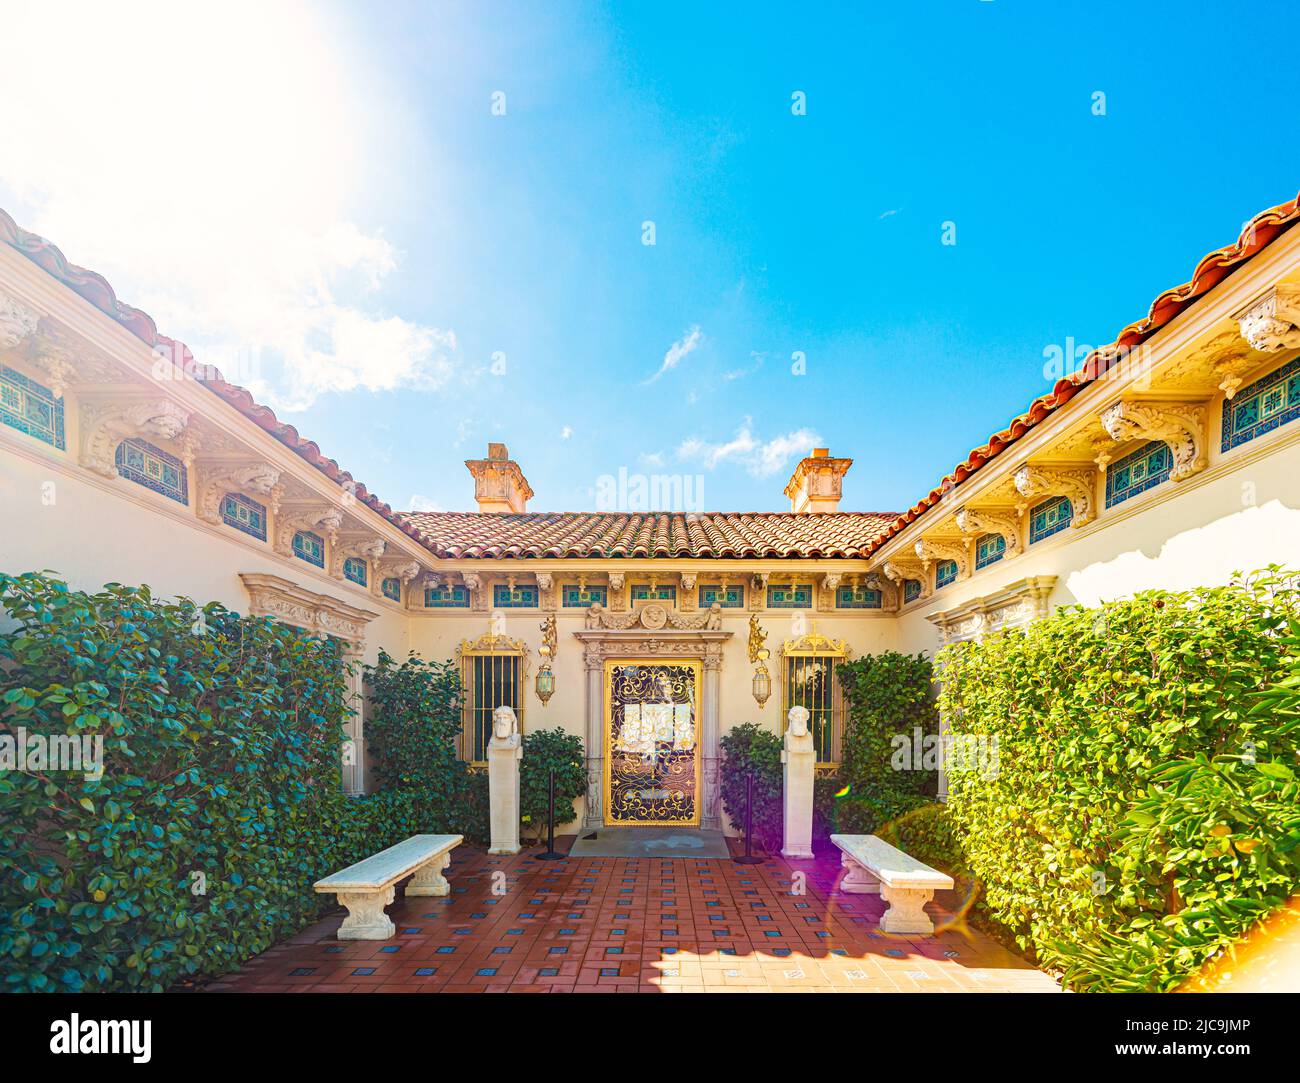 Hearst Castle, United States of America - November 1, 2016: Outdoor yard of mansion on sunny day Stock Photo